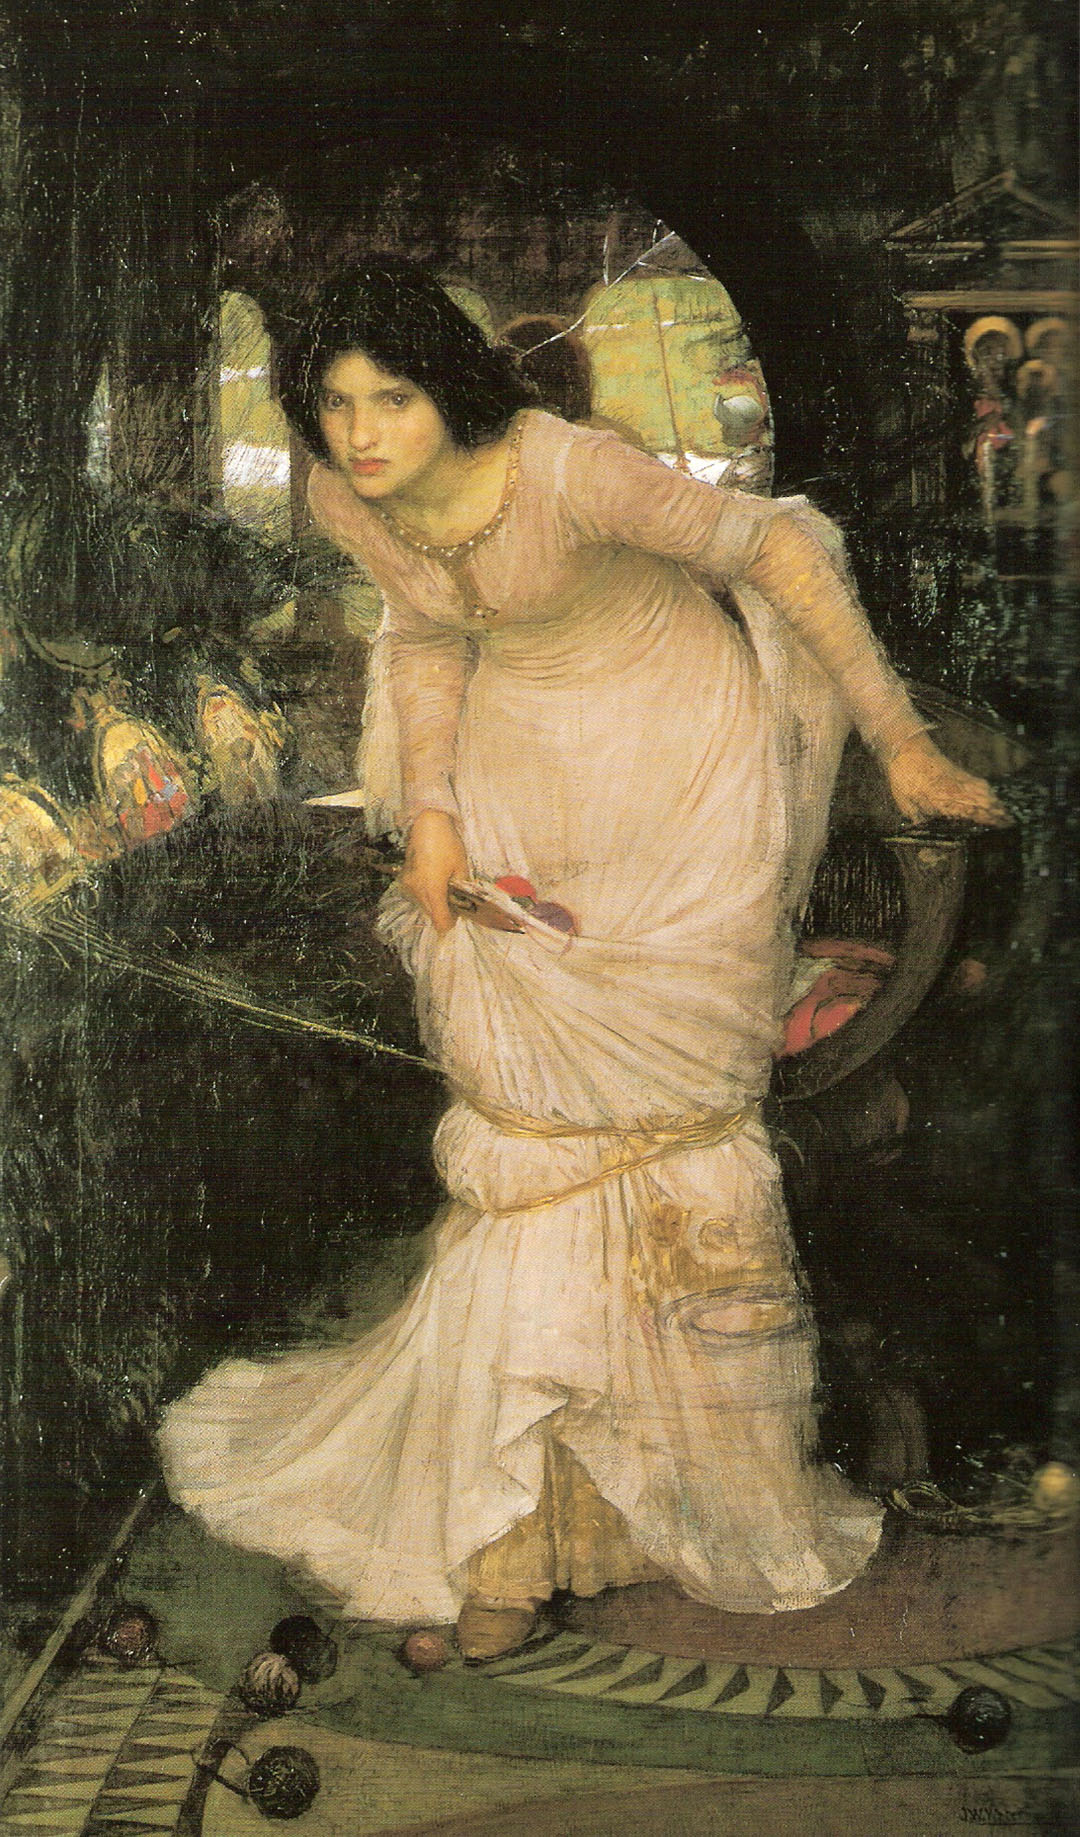 The Lady Of Shallot Looking At Lancelot By Waterhouse